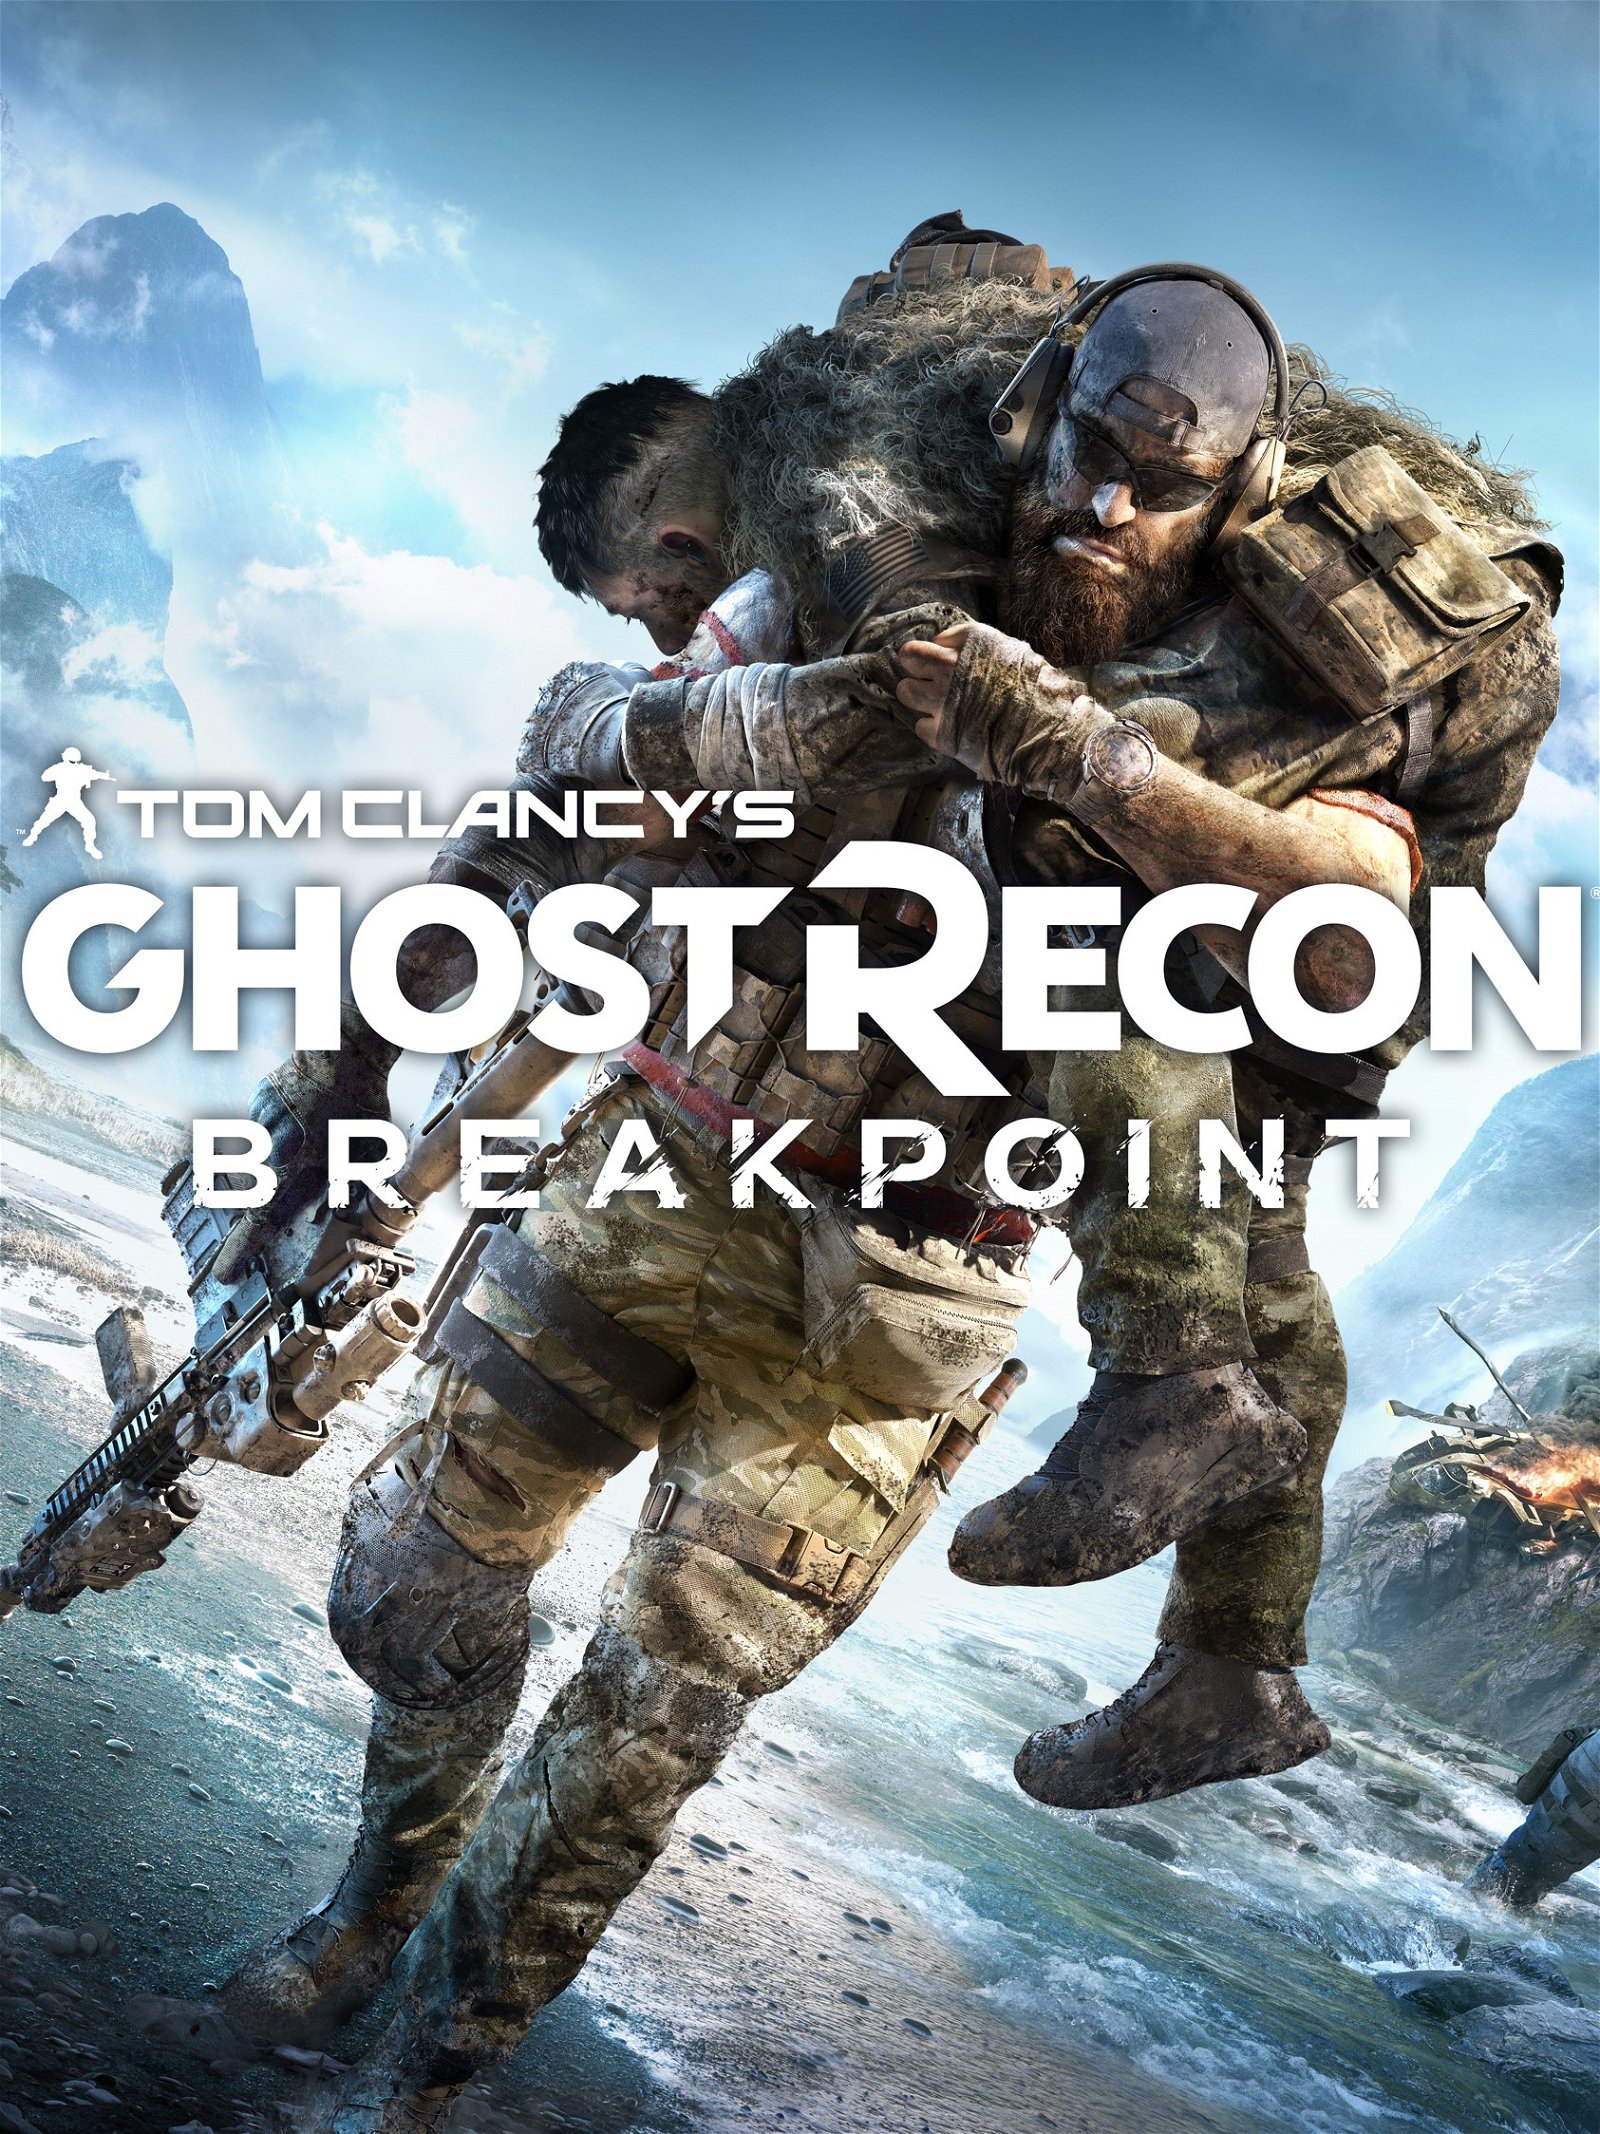 Image of Tom Clancy's Ghost Recon: Breakpoint